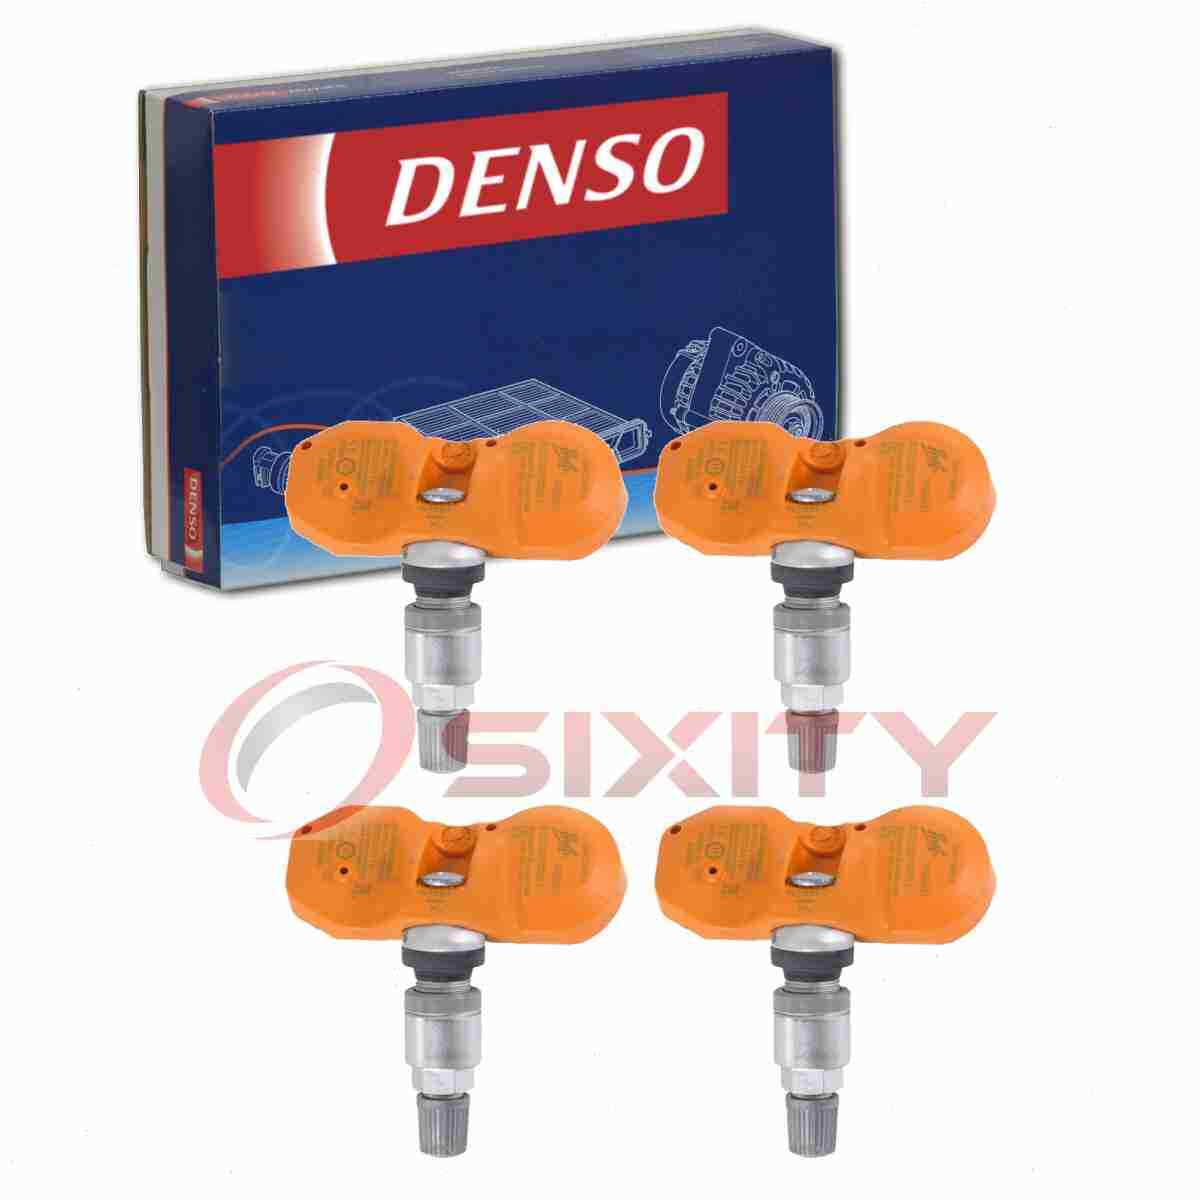 4 pc Denso Tire Pressure Monitoring System Sensors for 2002-2005 BMW 745i nt